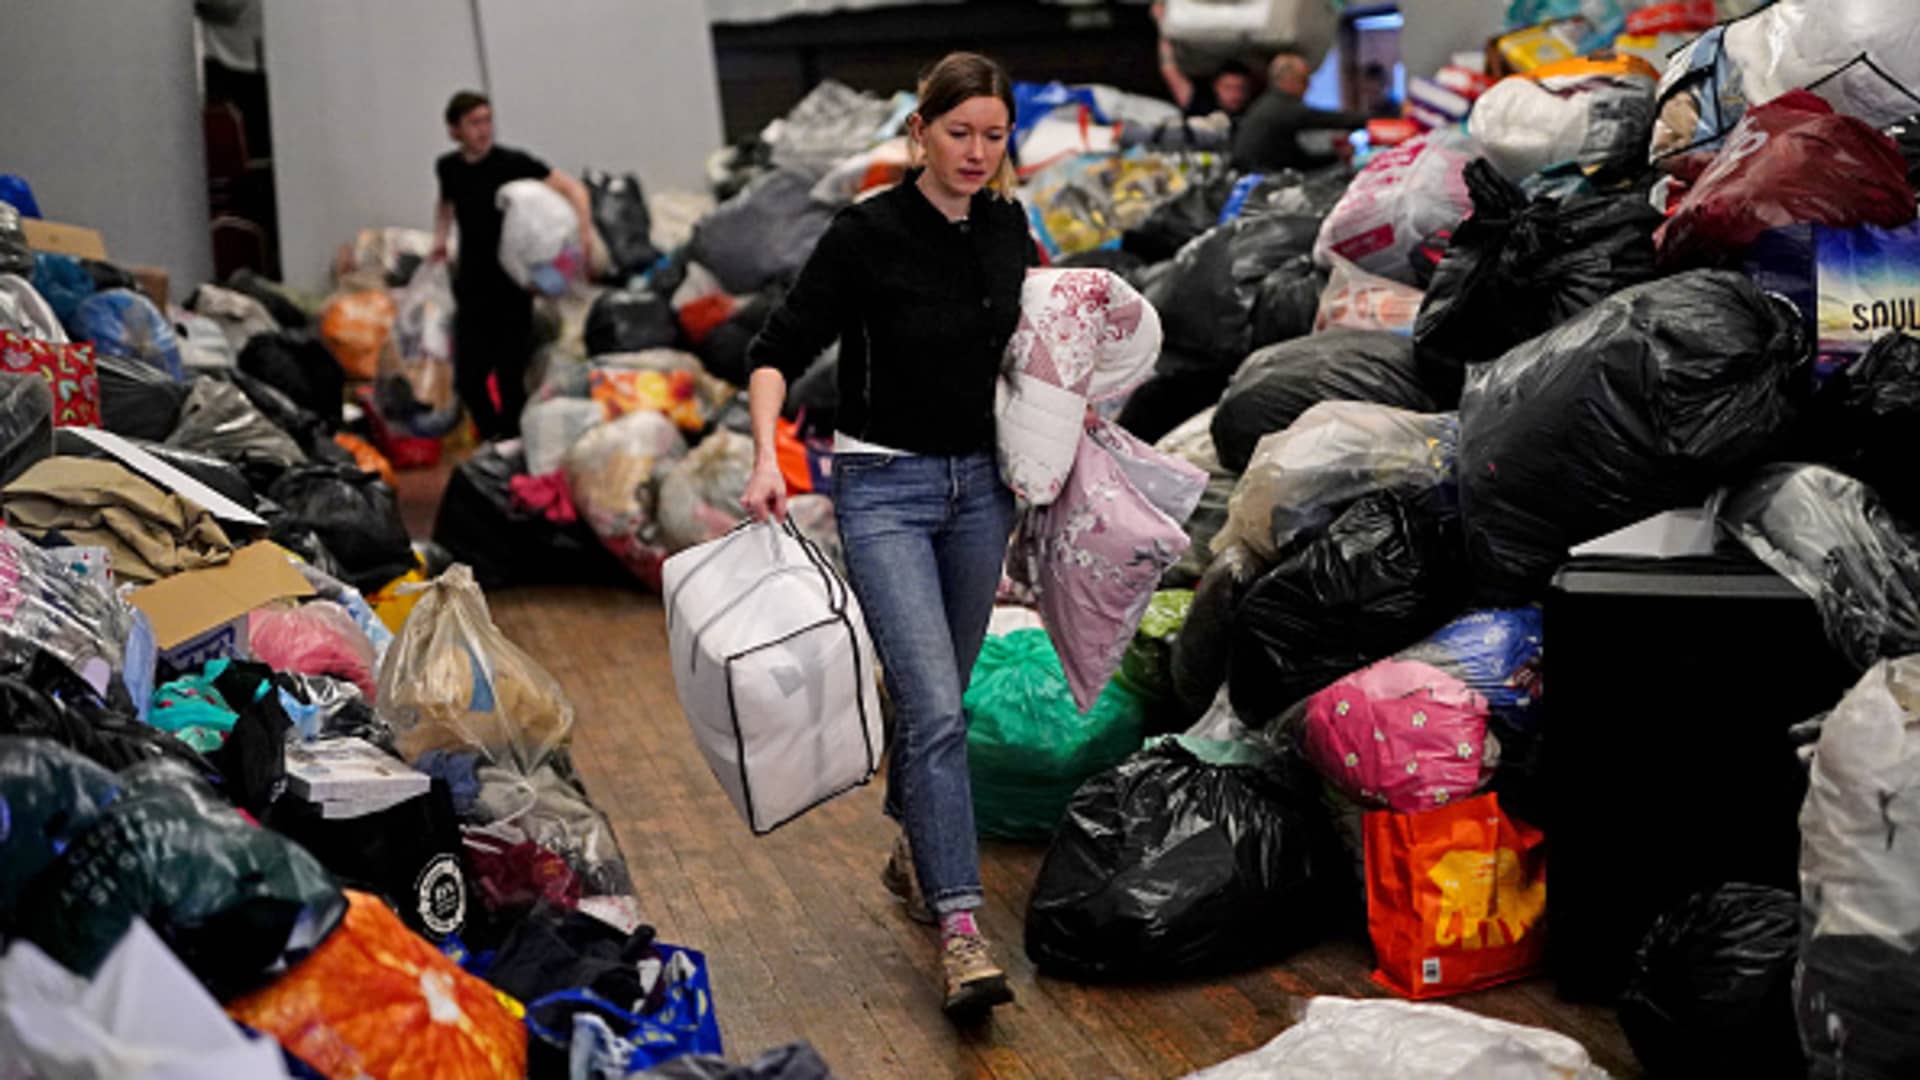 Volunteers at the Klub Orla Bialegoin Balham, south London, sort through donations made by members of the public to be sent overseas as aid to Ukrainian refugees fleeing the Russian invasion.